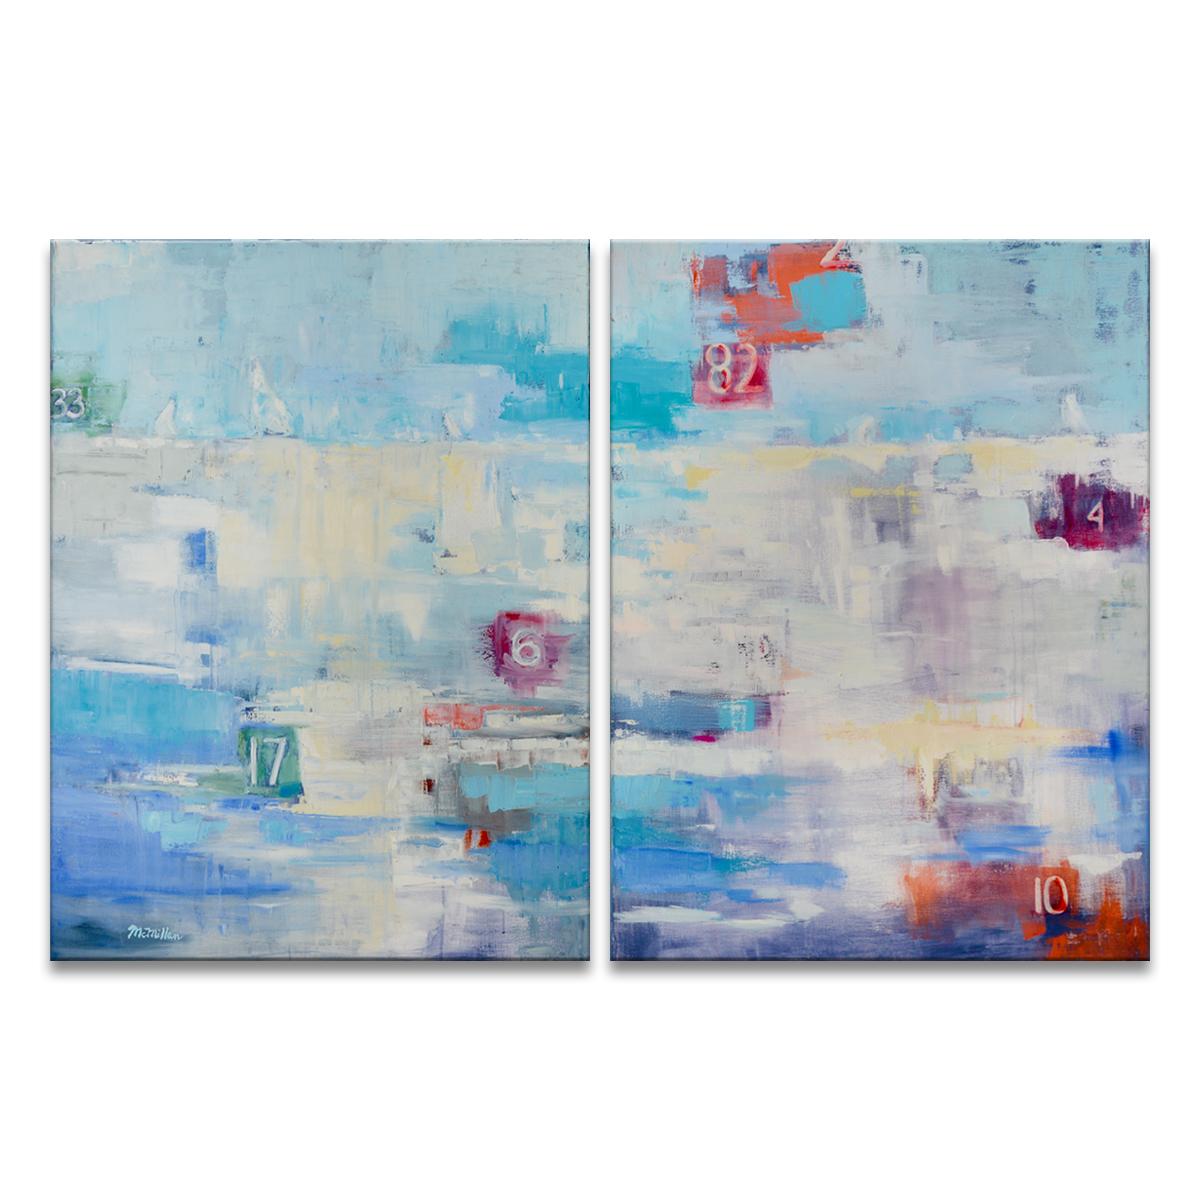 ‘Channel Markers' Wrapped Canvas Original Painting is a two-piece modern coastal set featuring an abstract view of ocean channel markers in tones of blue, gray, soft yellow, orange, fuchsia, red, and green. Effortlessly add beauty and grace to your